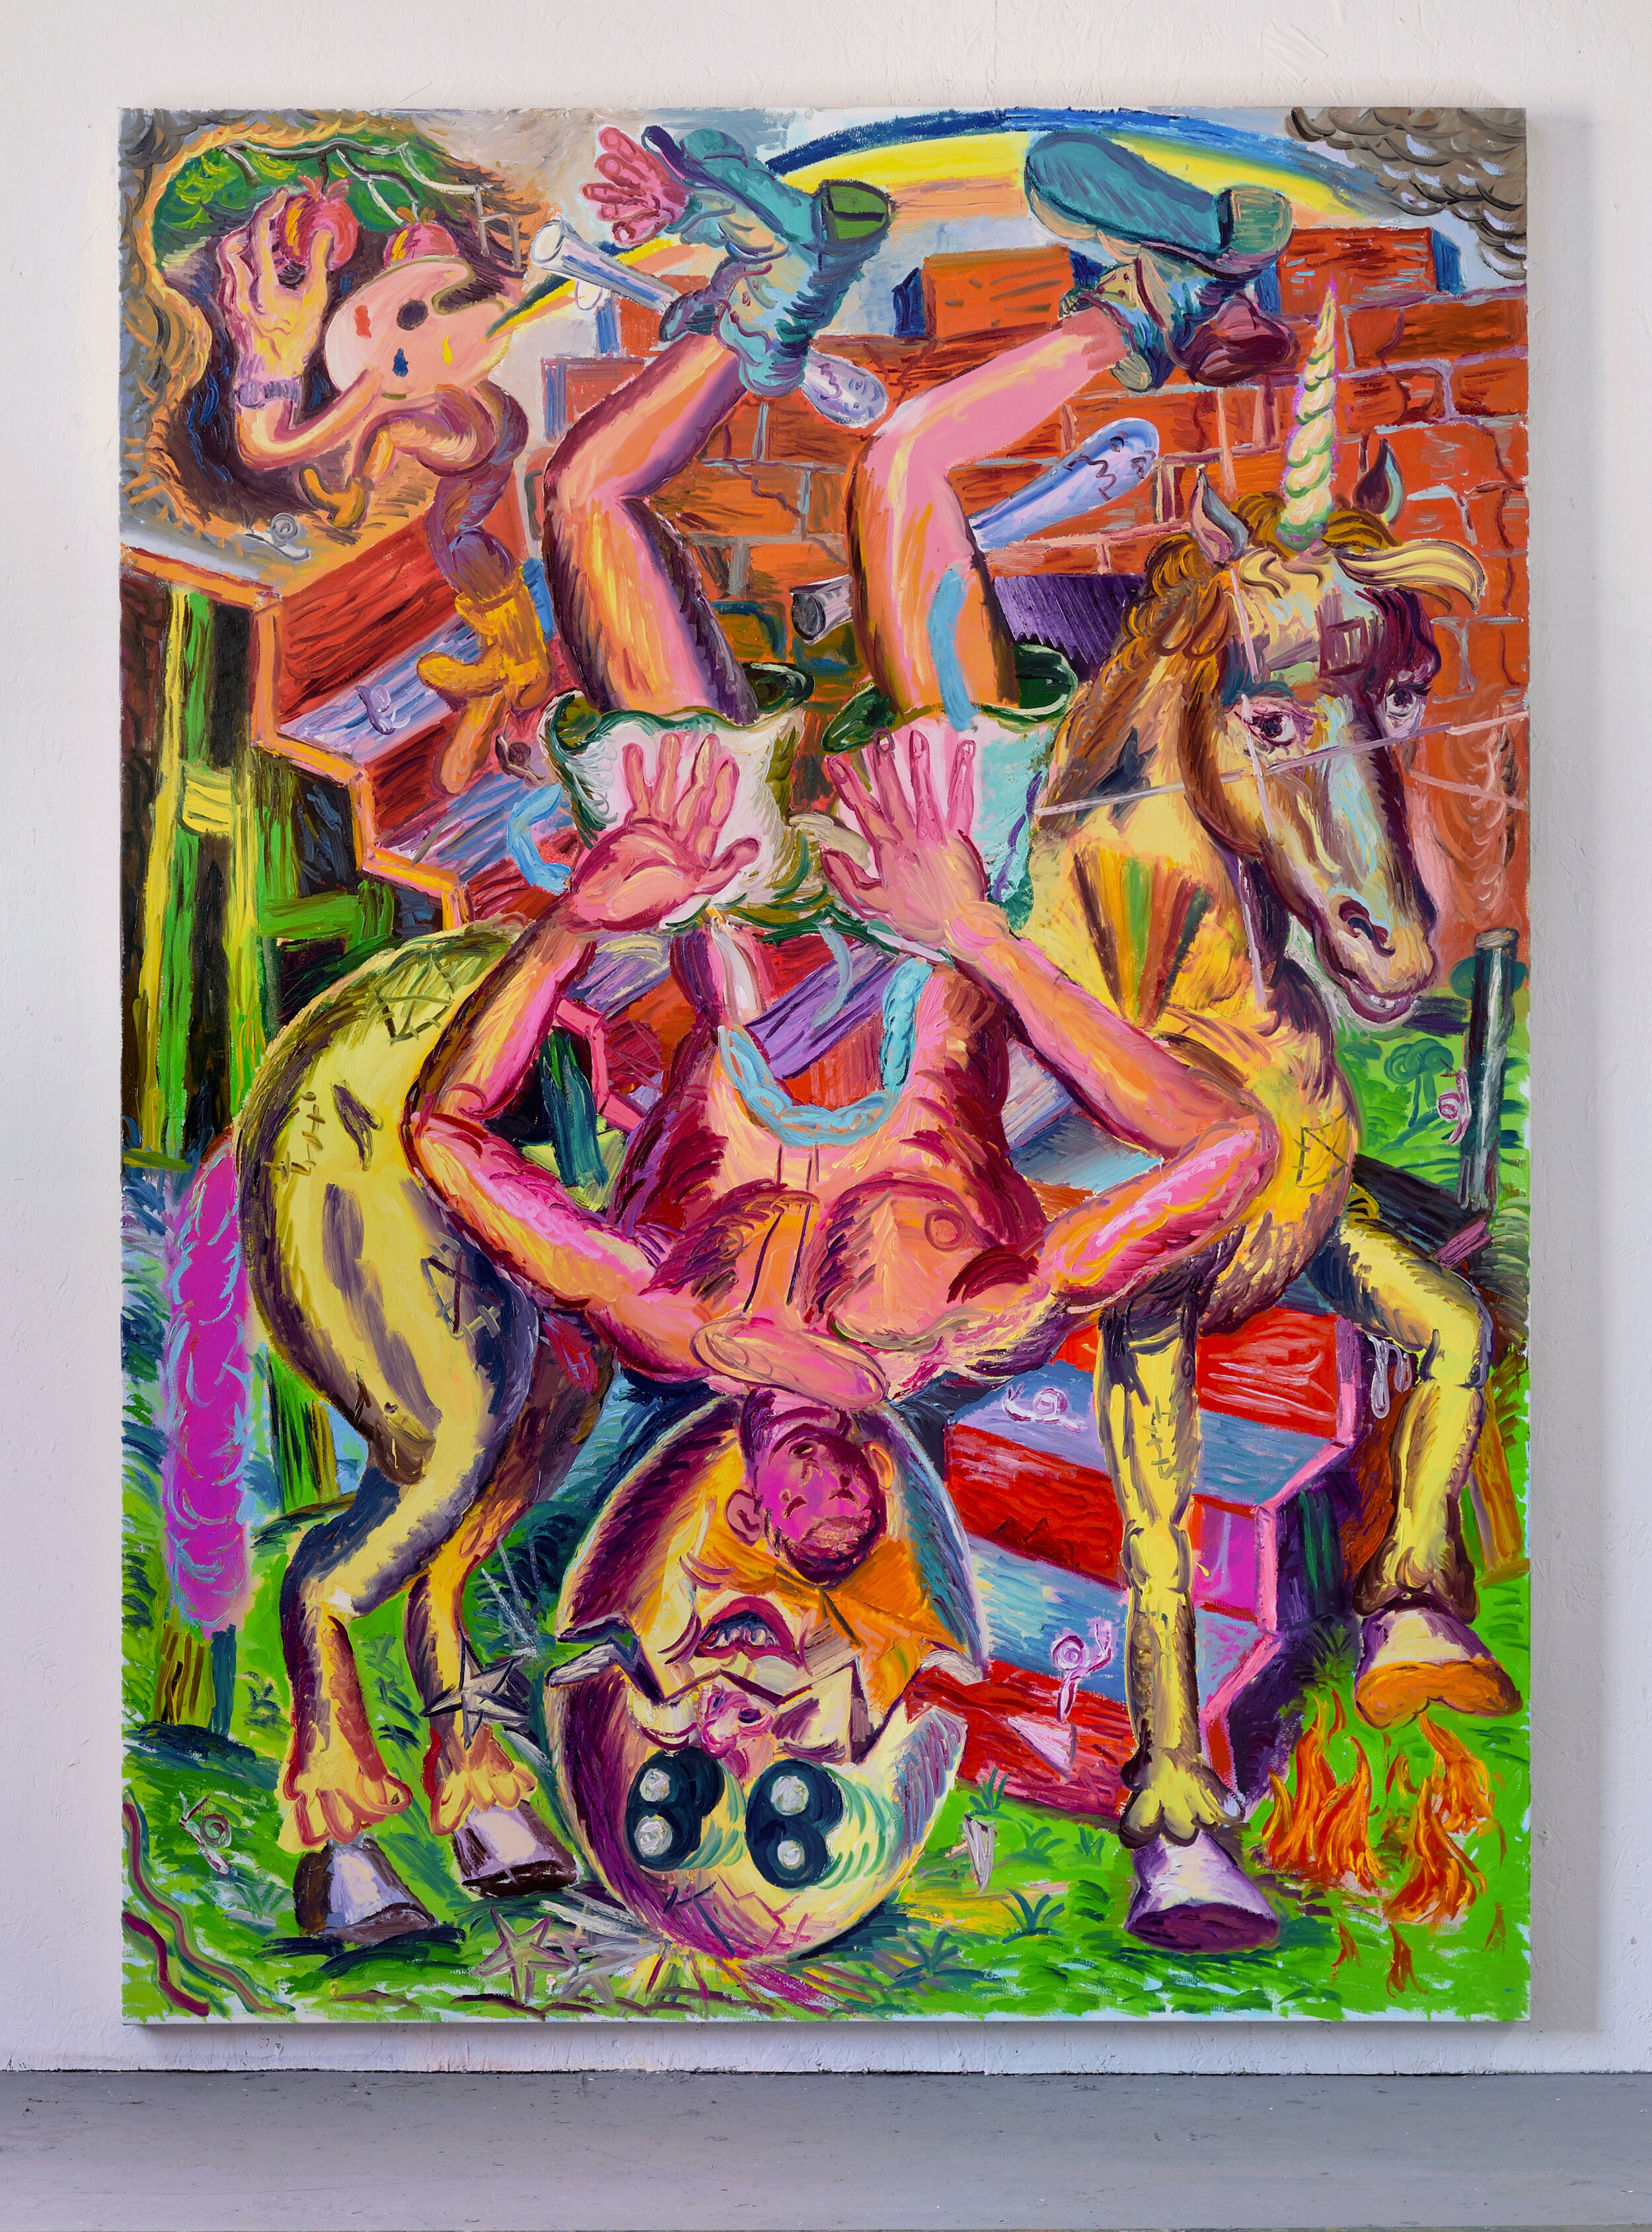    ‘The unicorn and the egg’ 2020   Oil on canvas. 200 x 150 cm 